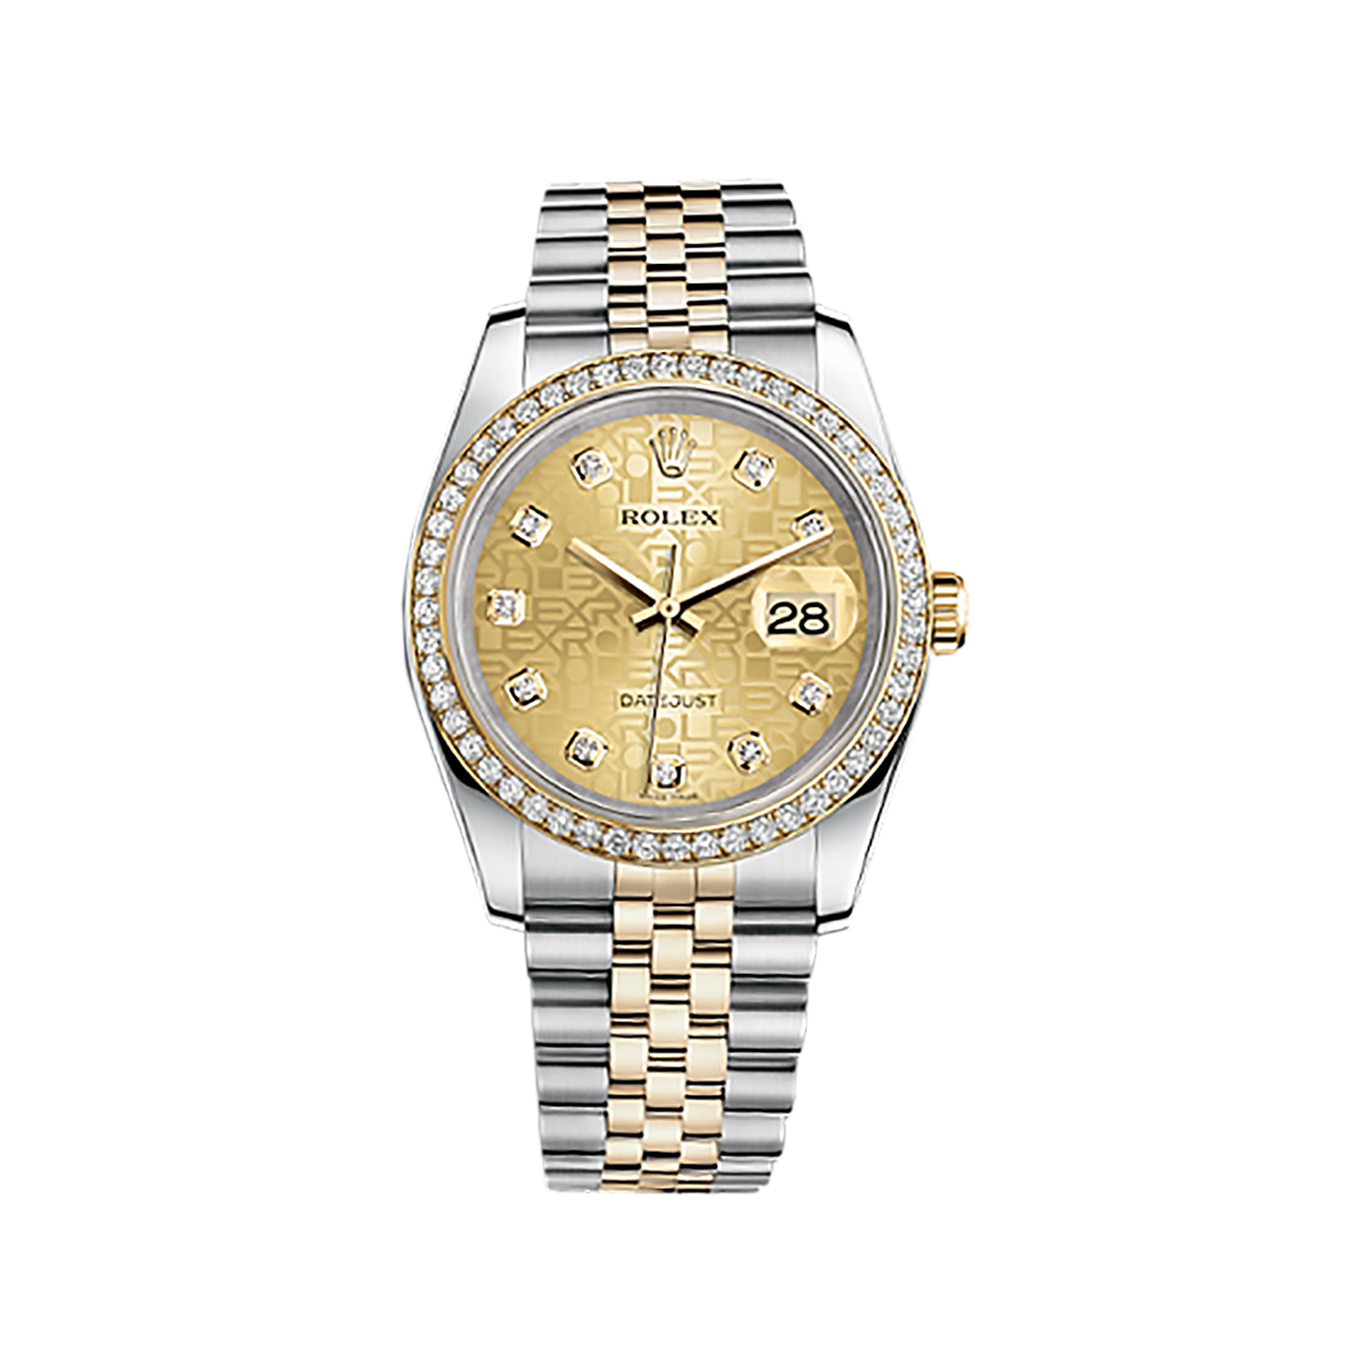 Datejust 36 116243 Gold & Stainless Steel Watch (Champagne Jubilee Design Set with Diamonds)